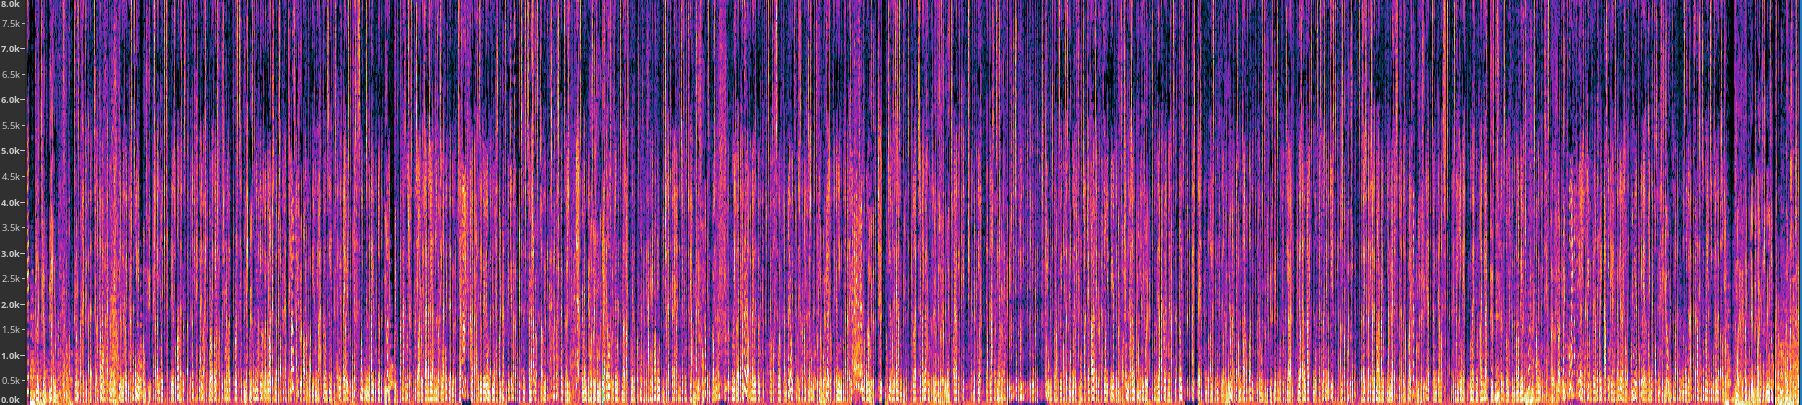 A spectrogram with the majority of the high intensity data points clustered at the lowest frequencies of the spectrum